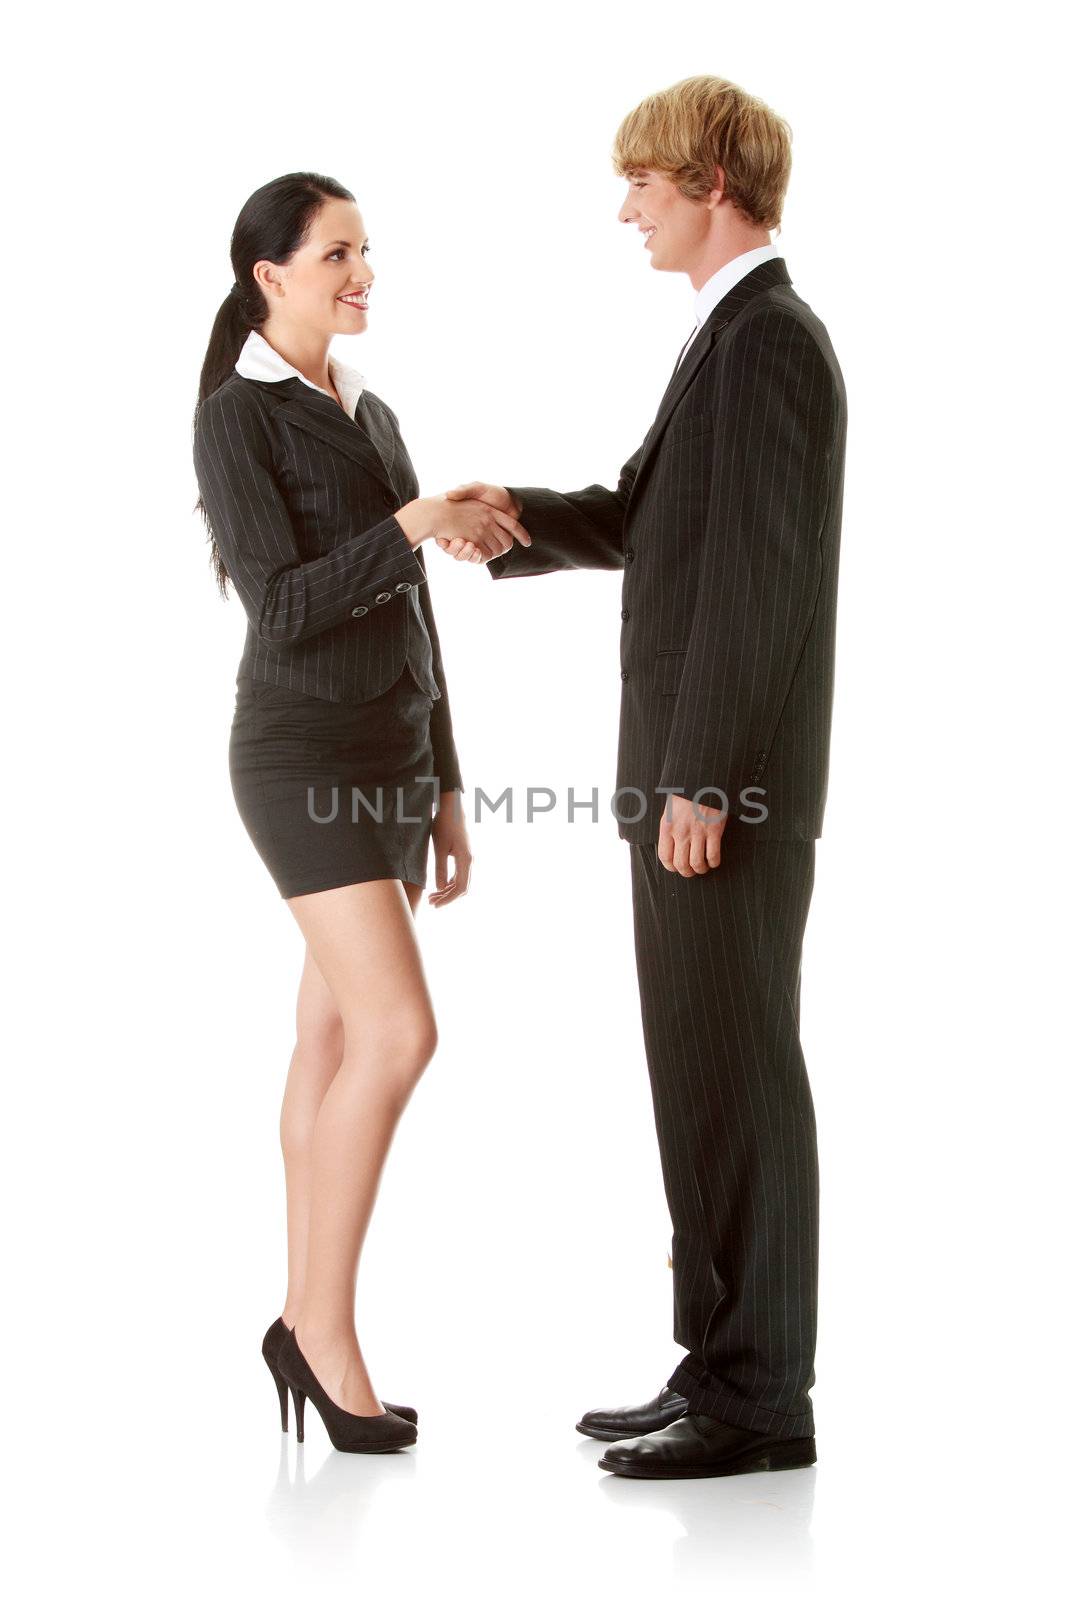 Successful young business executives shaking hands with each other